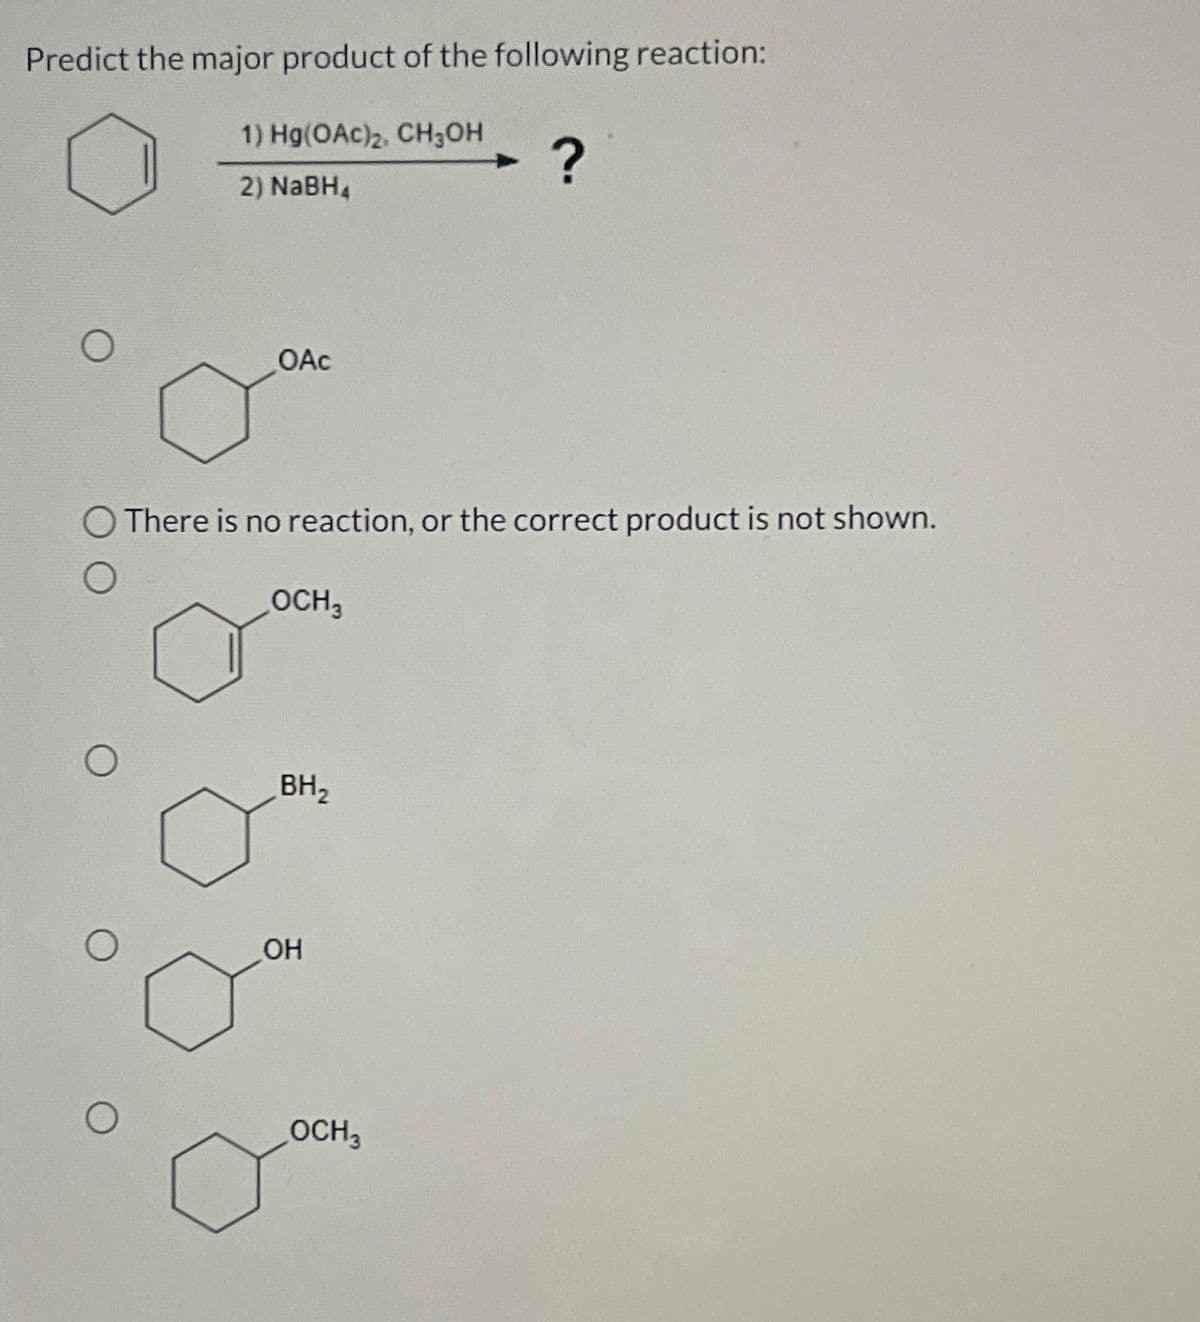 Predict the major product of the following reaction:
O
O
O
O
1) Hg(OAC)2, CH₂OH
2) NaBH4
OAC
There is no reaction, or the correct product is not shown.
OCH 3
BH₂
OH
?
OCH3